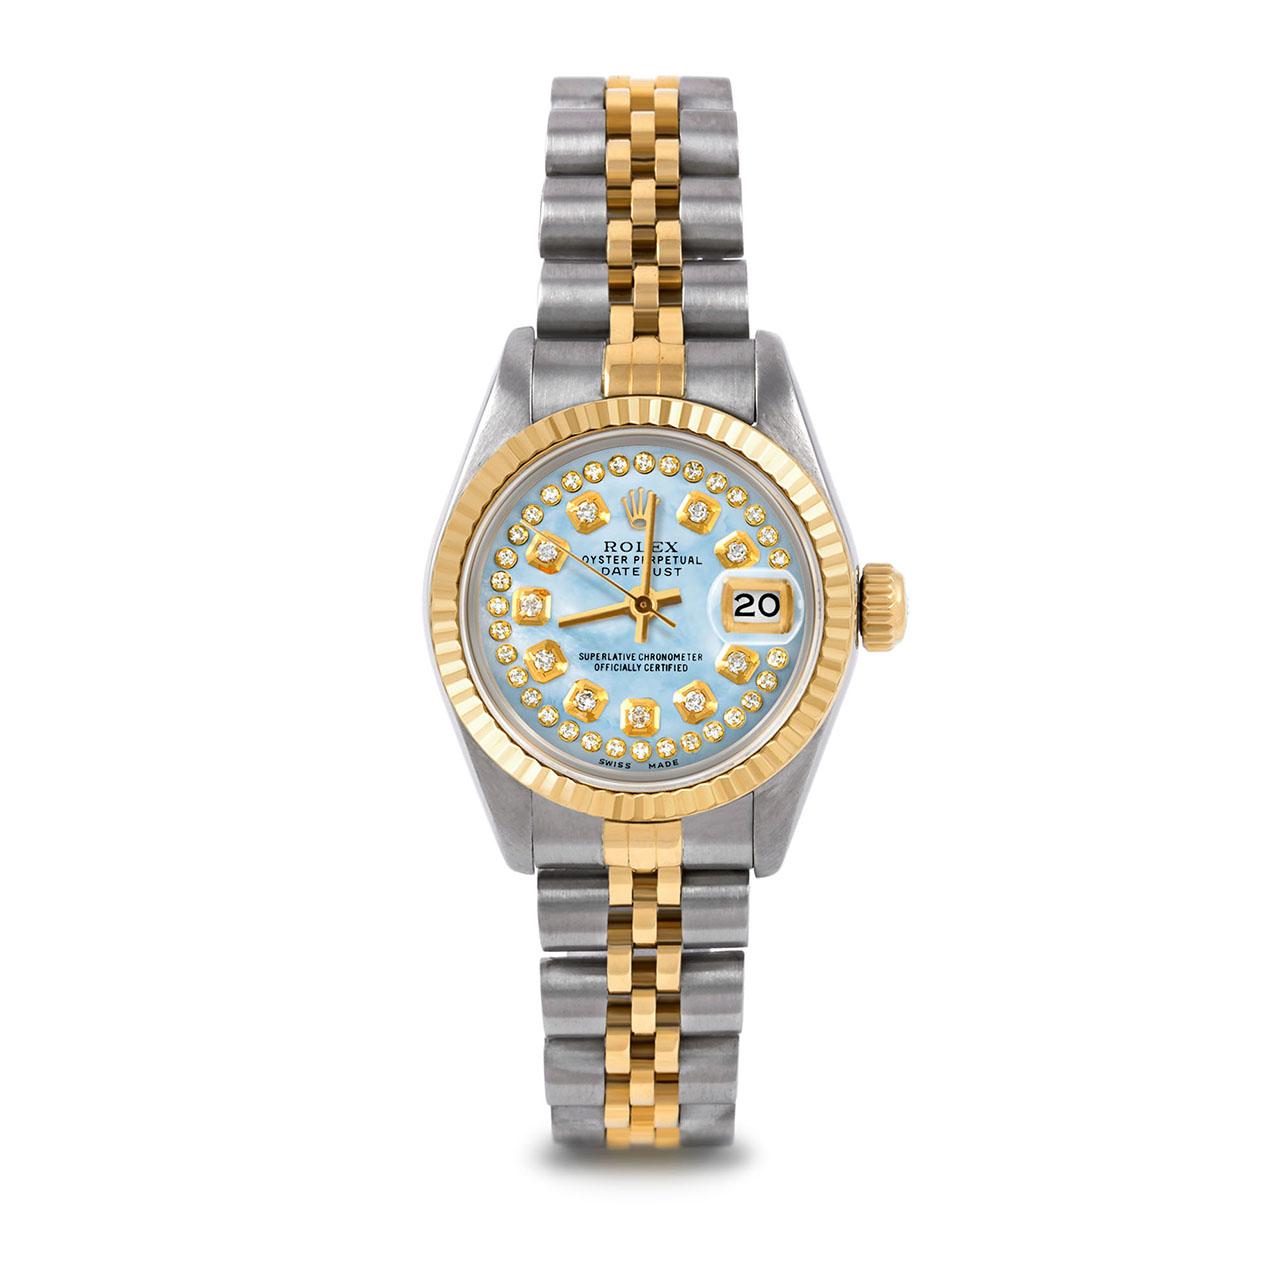 Pre-Owned Rolex 6917 Ladies 26mm Two Tone Datejust Watch, Custom Light Blue Mother of Pearl String Diamond Dial & Fluted Bezel on Rolex 14K Yellow Gold And Stainless Steel Jubilee Band.   

SKU 6917-TT-LBMOP-STRD-FLT-JBL


Brand/Model:        Rolex